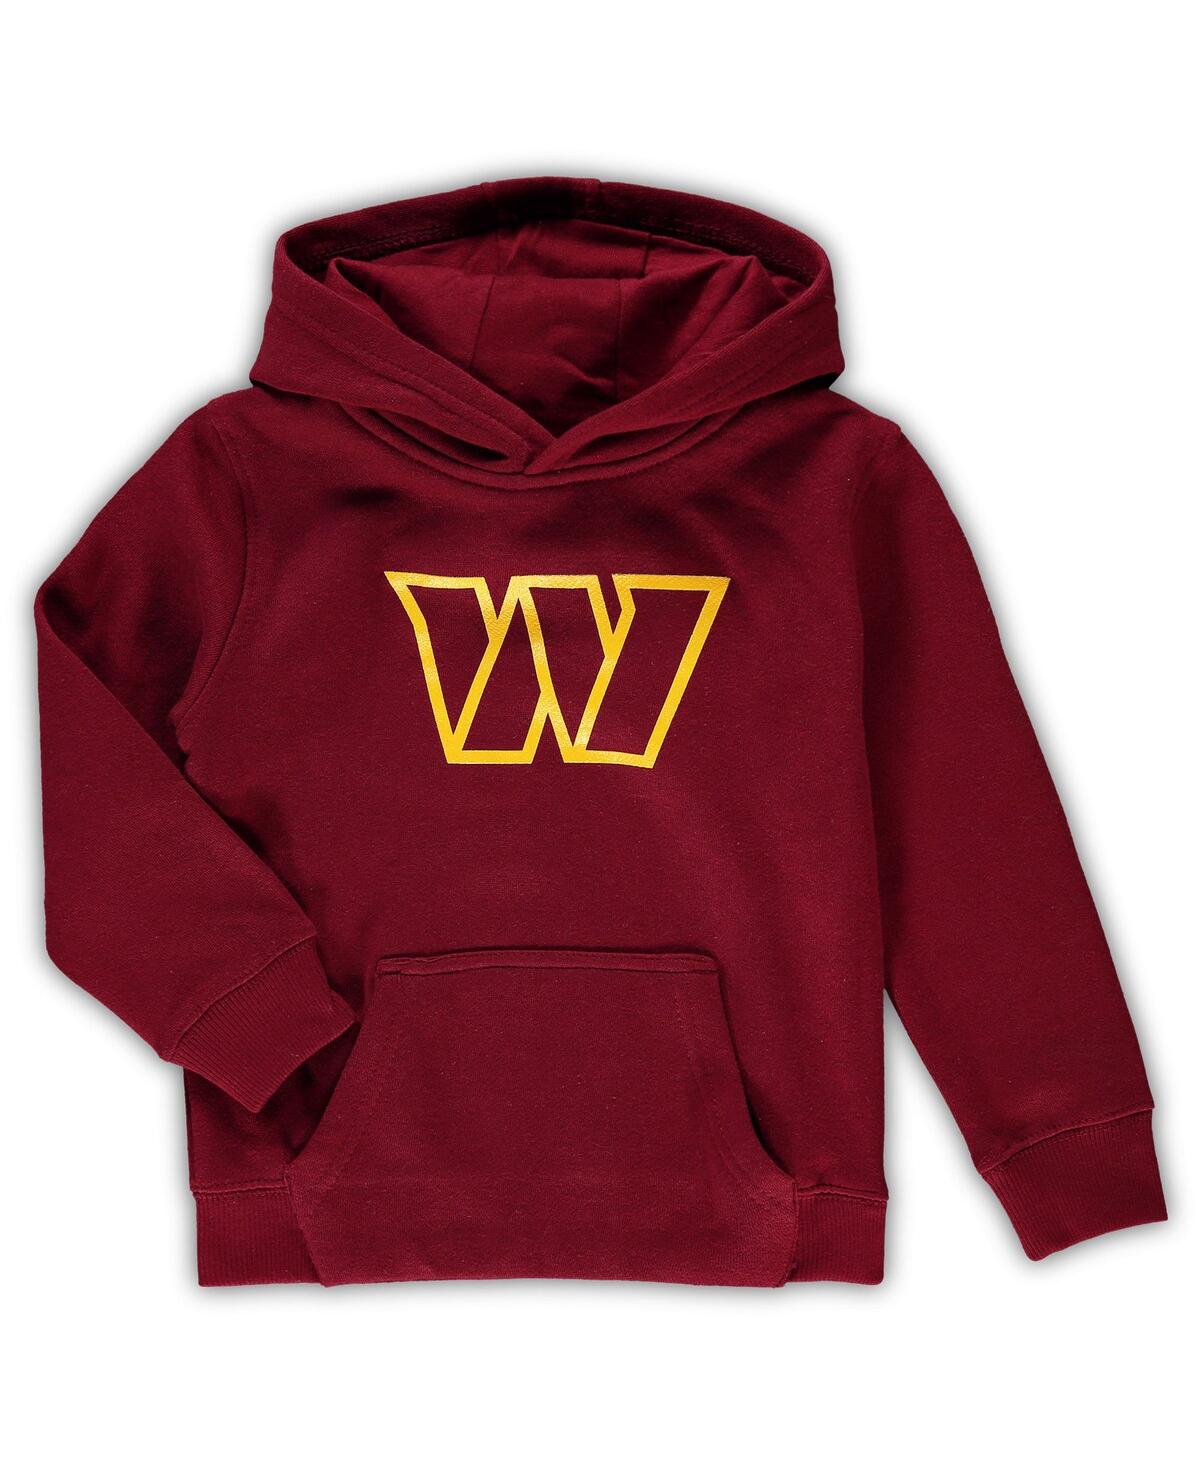 Outerstuff Babies' Toddler Boys And Girls Burgundy Washington Commanders Team Logo Pullover Hoodie